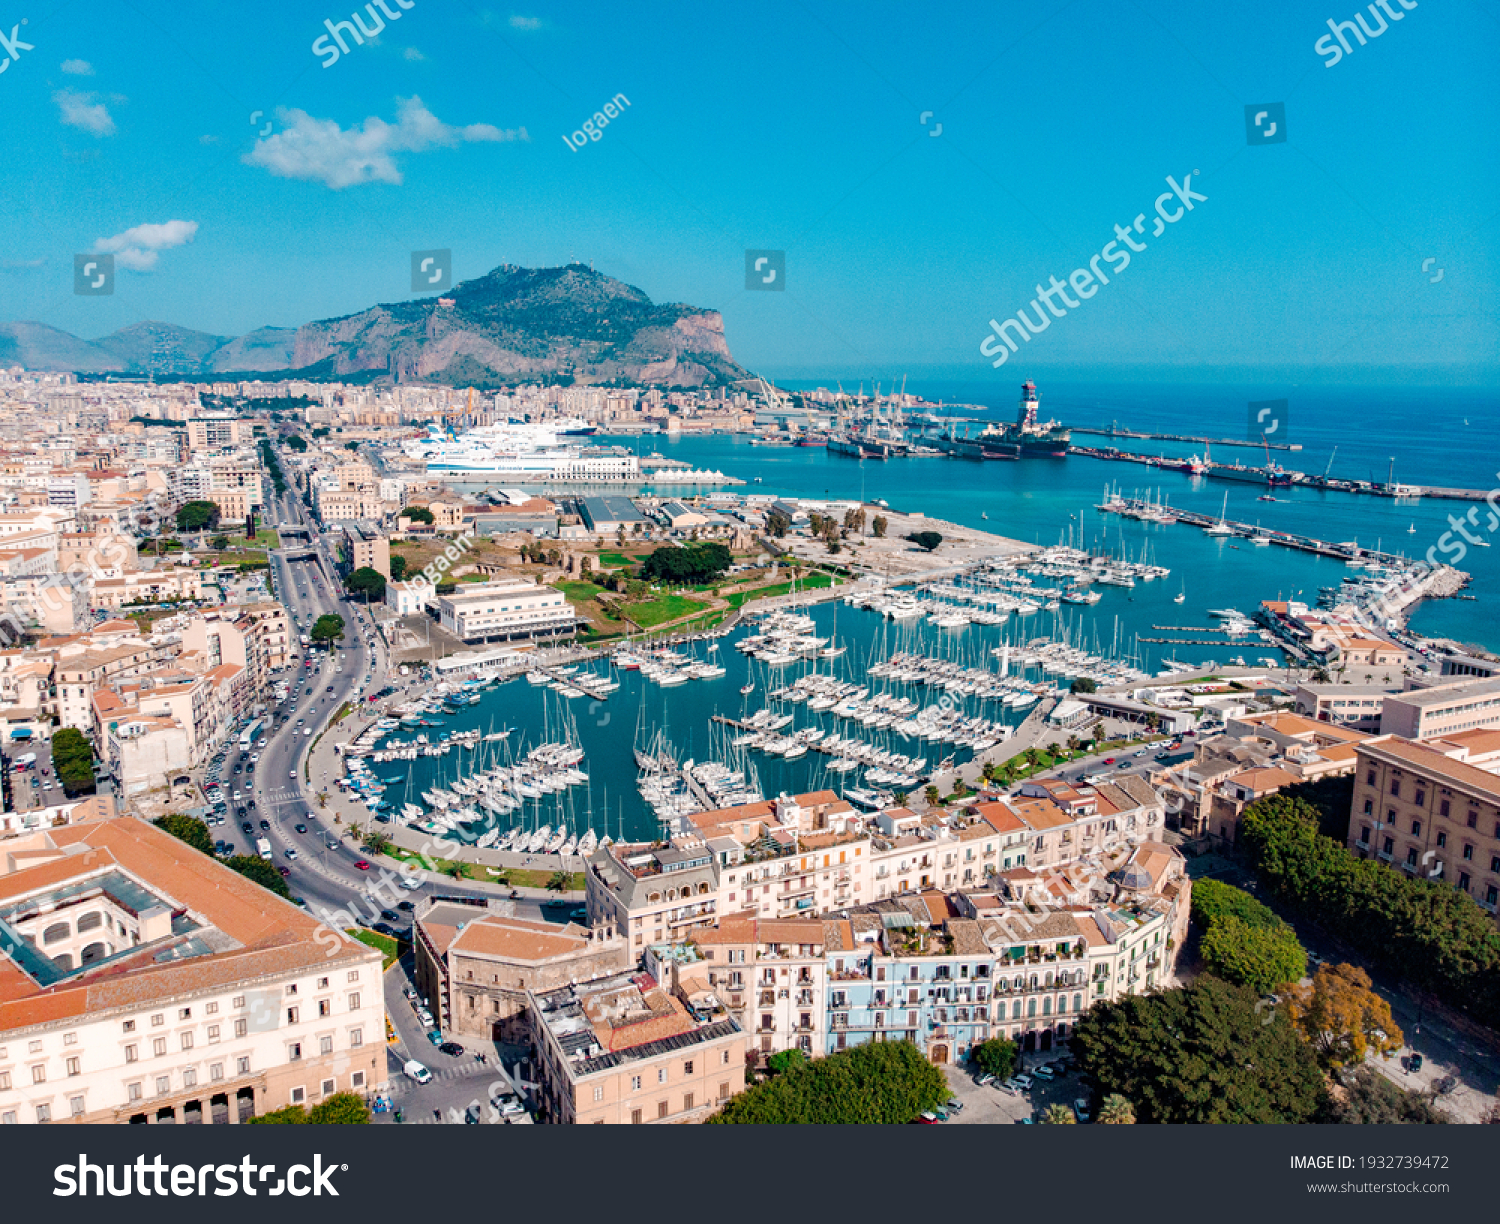 Palermo City, Sicily island in Italy. Aerial view of beautiful Mediterranean town. Drone Photography #1932739472